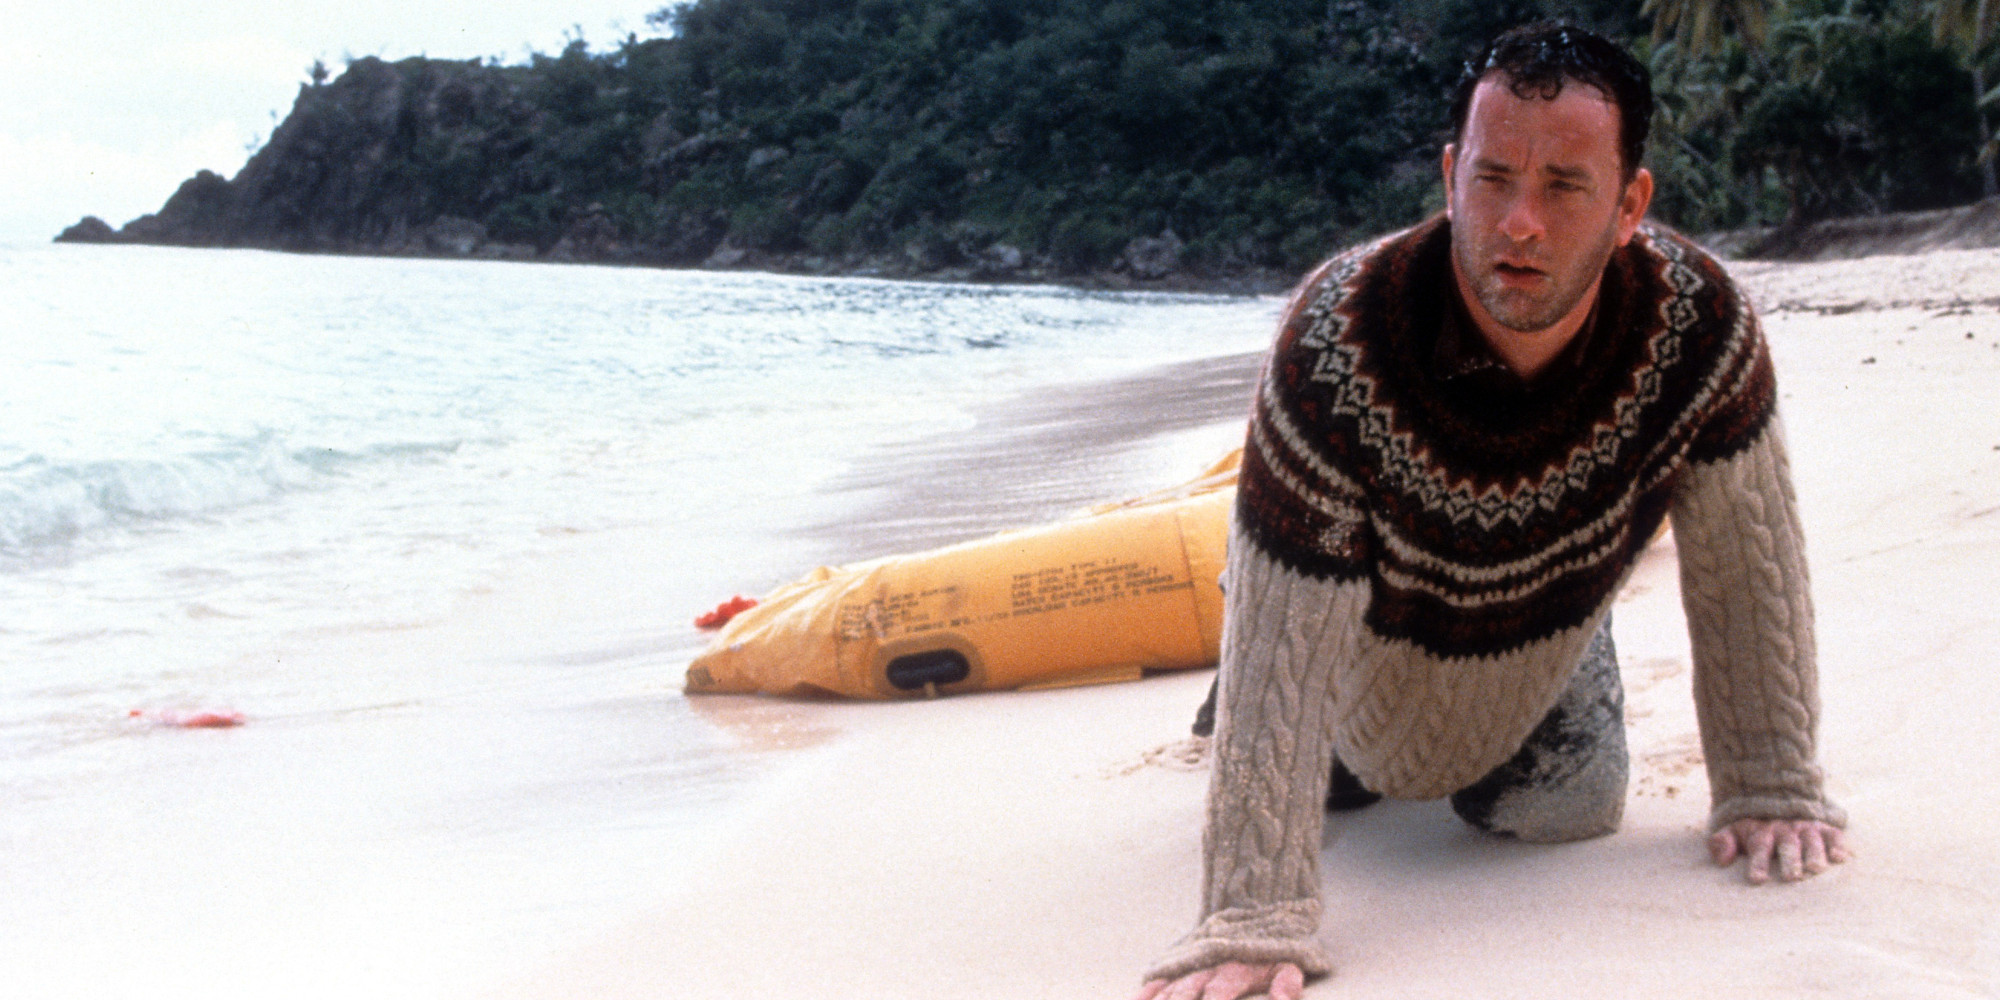 tom-hanks-was-reunited-with-wilson-from-cast-away